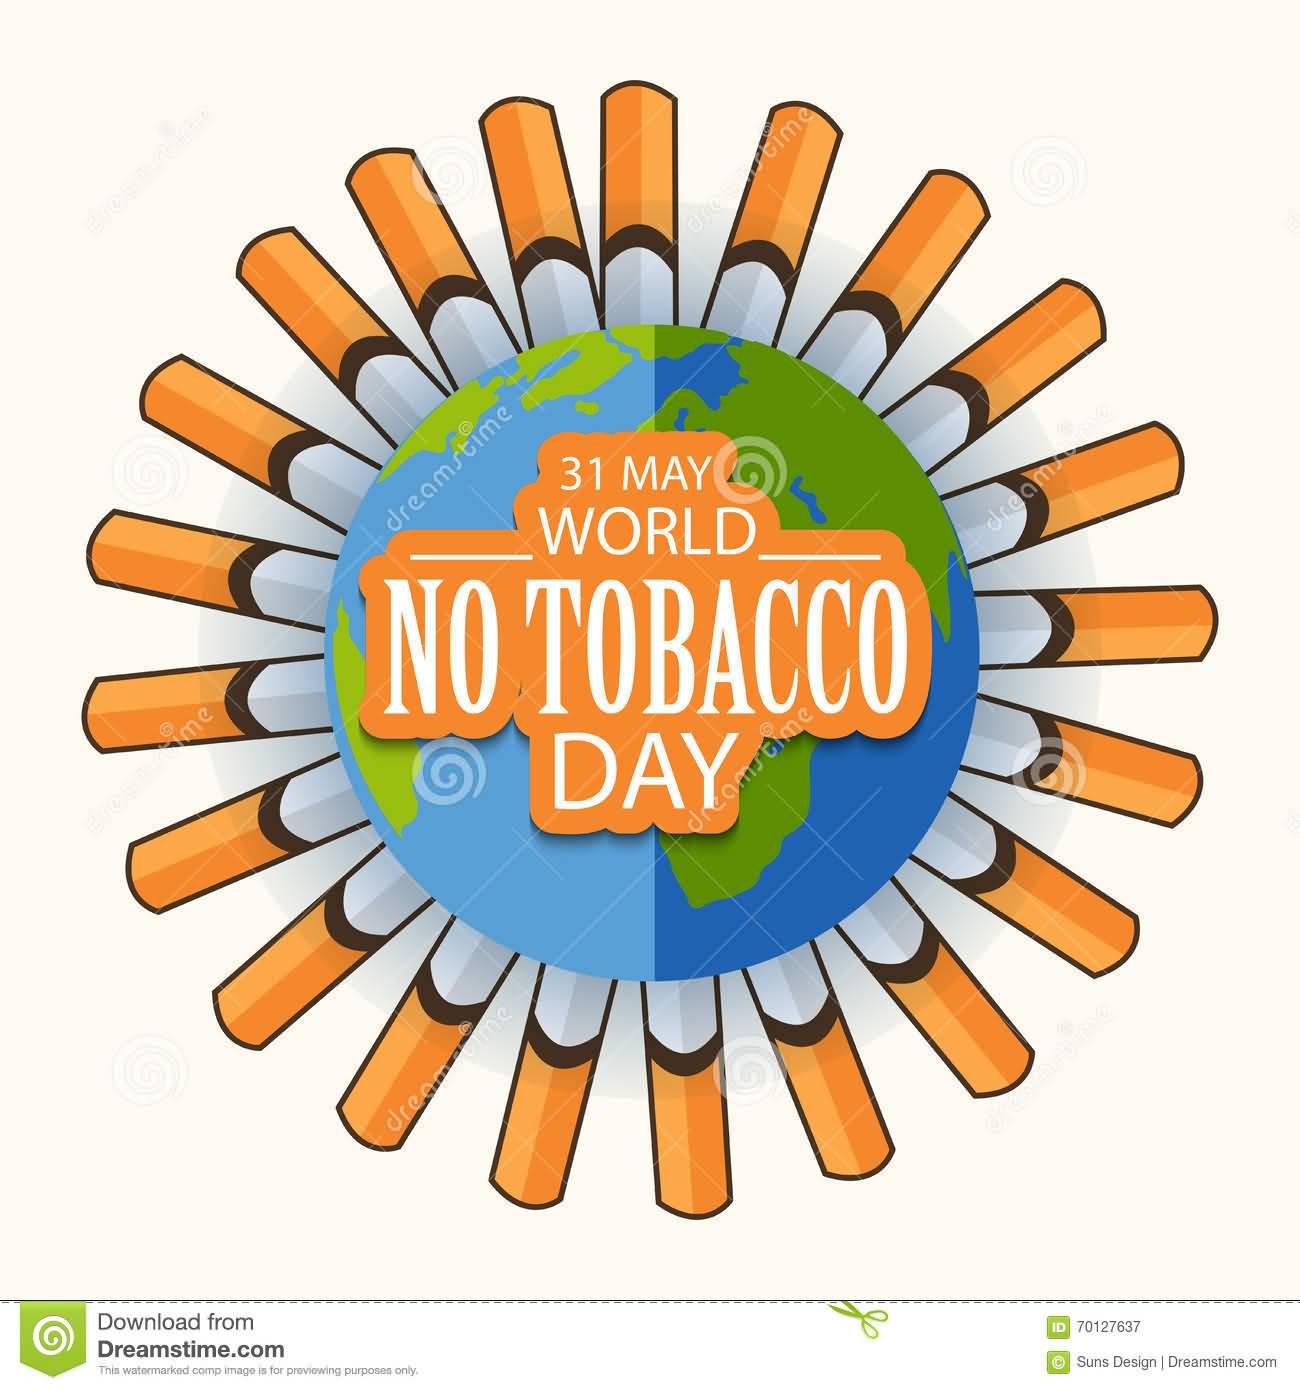 40+ World No Tobacco Day 2017 Photos And Images